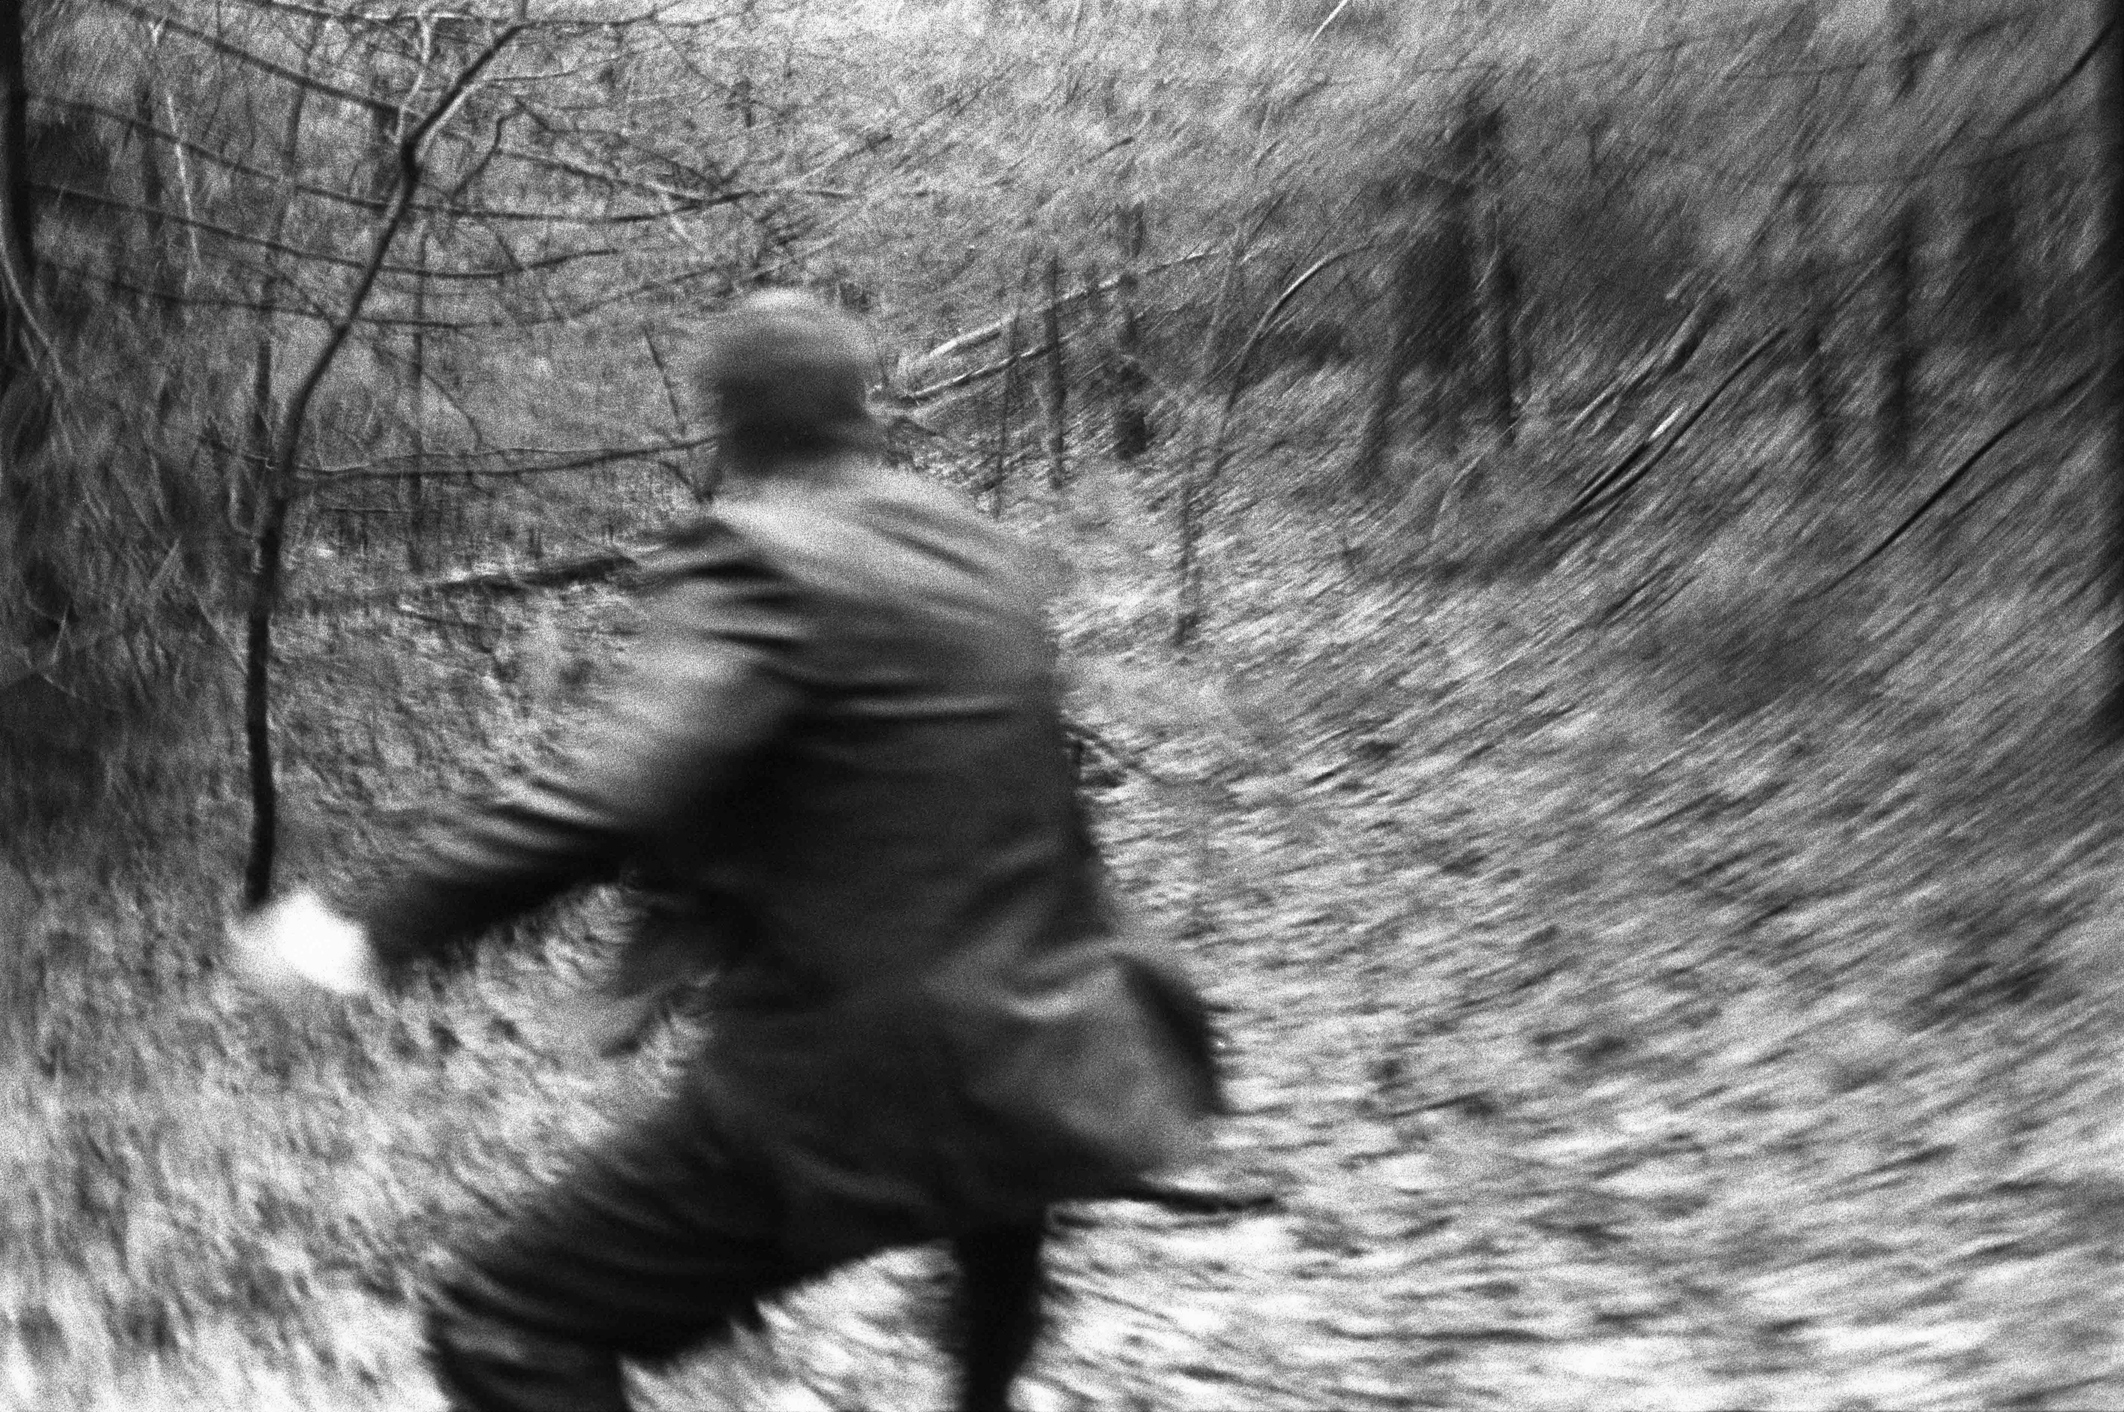 Man running or chasing something in the woods